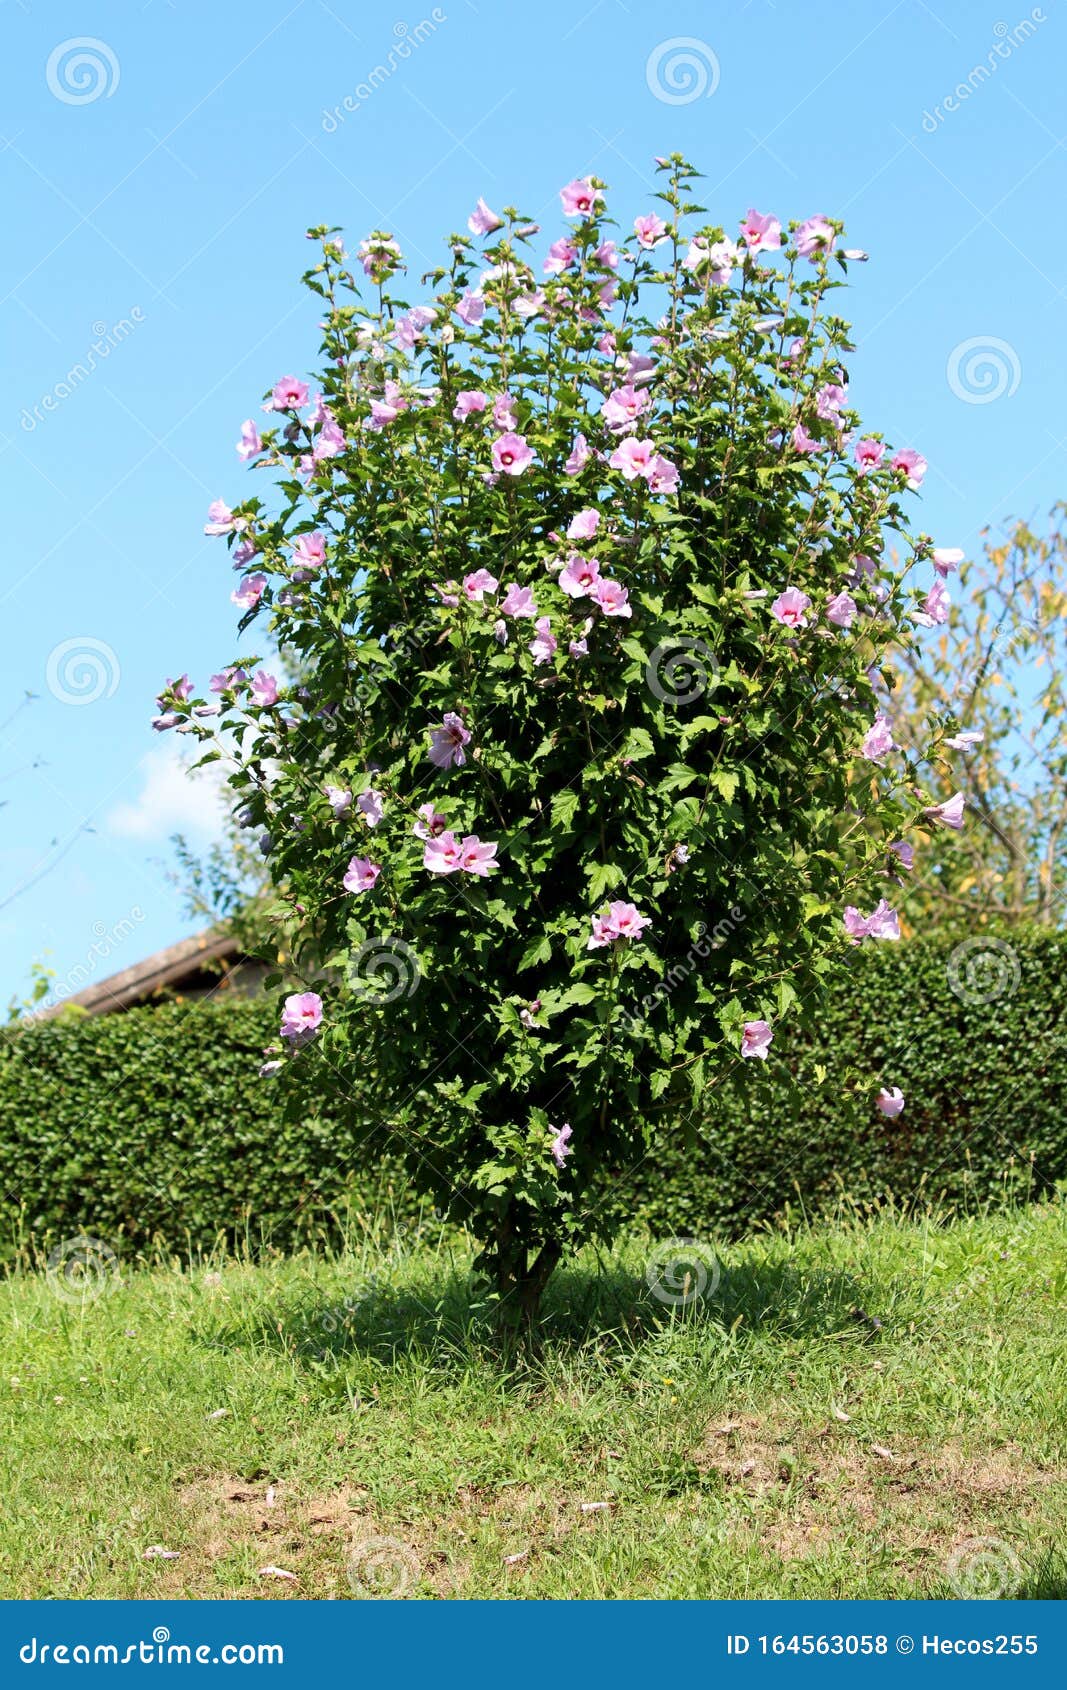 hibiscus syriacus or rose of sharon flowering plant growing as